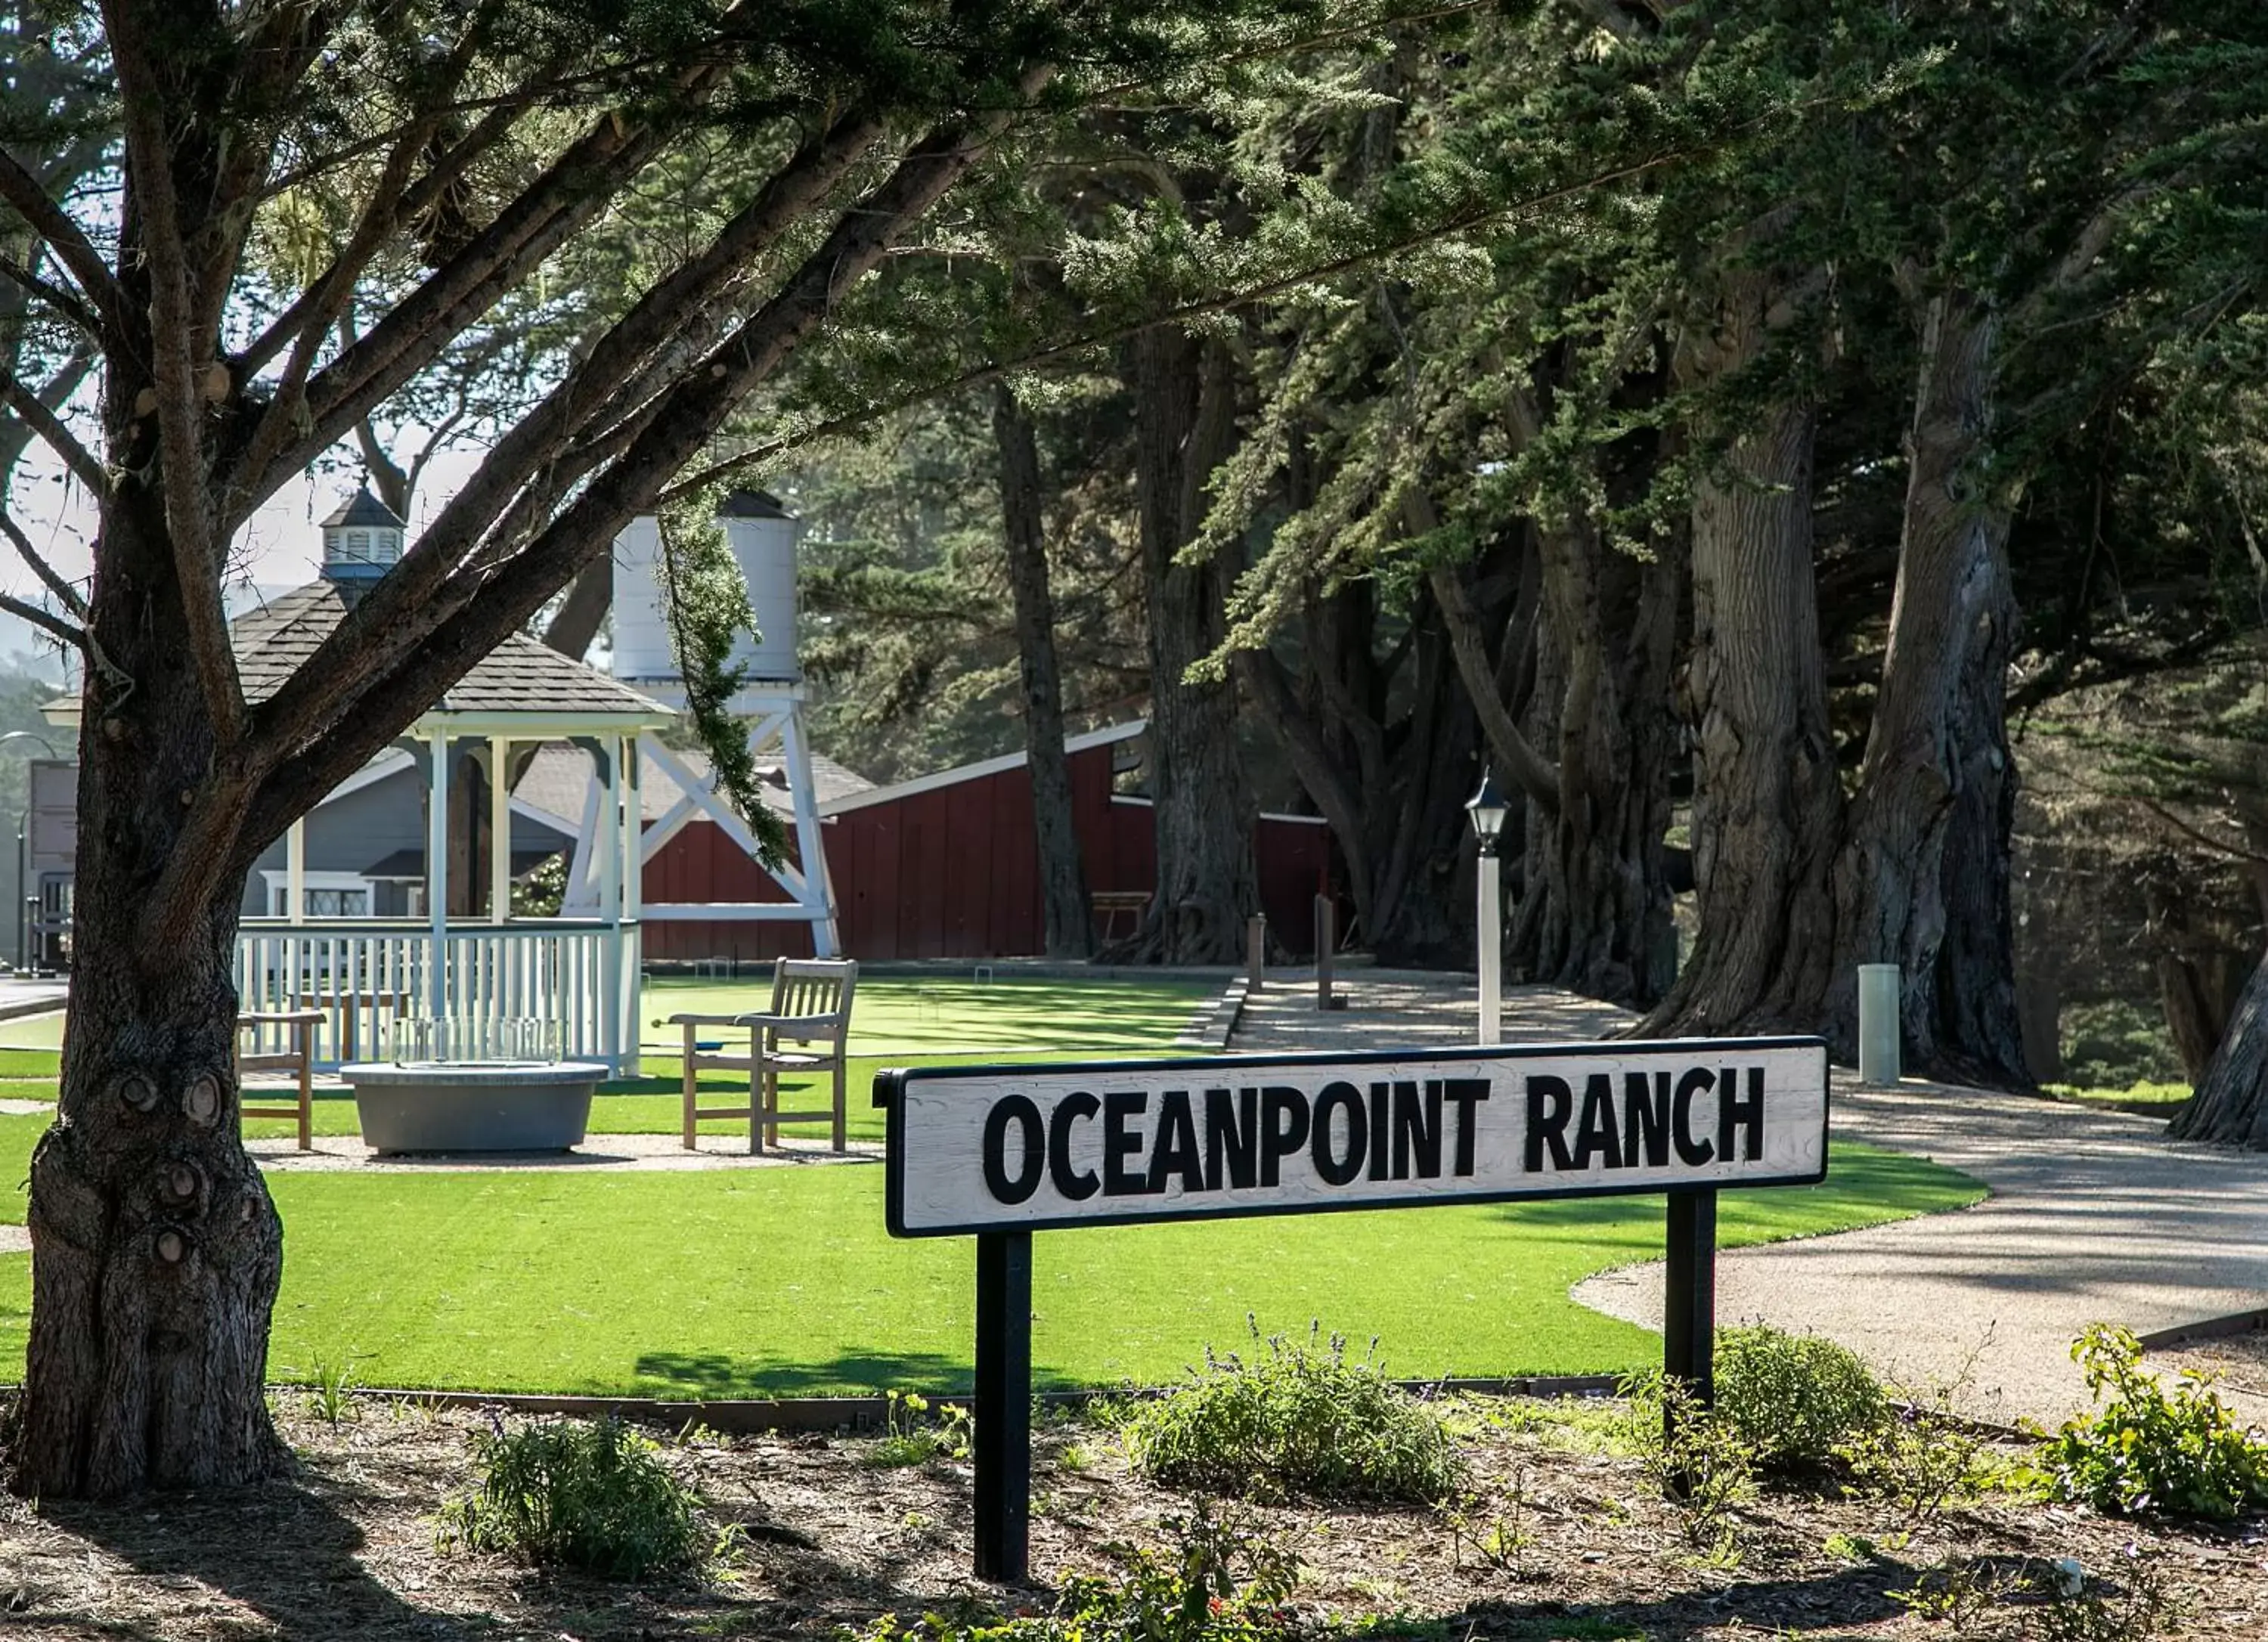 Property logo or sign in Oceanpoint Ranch